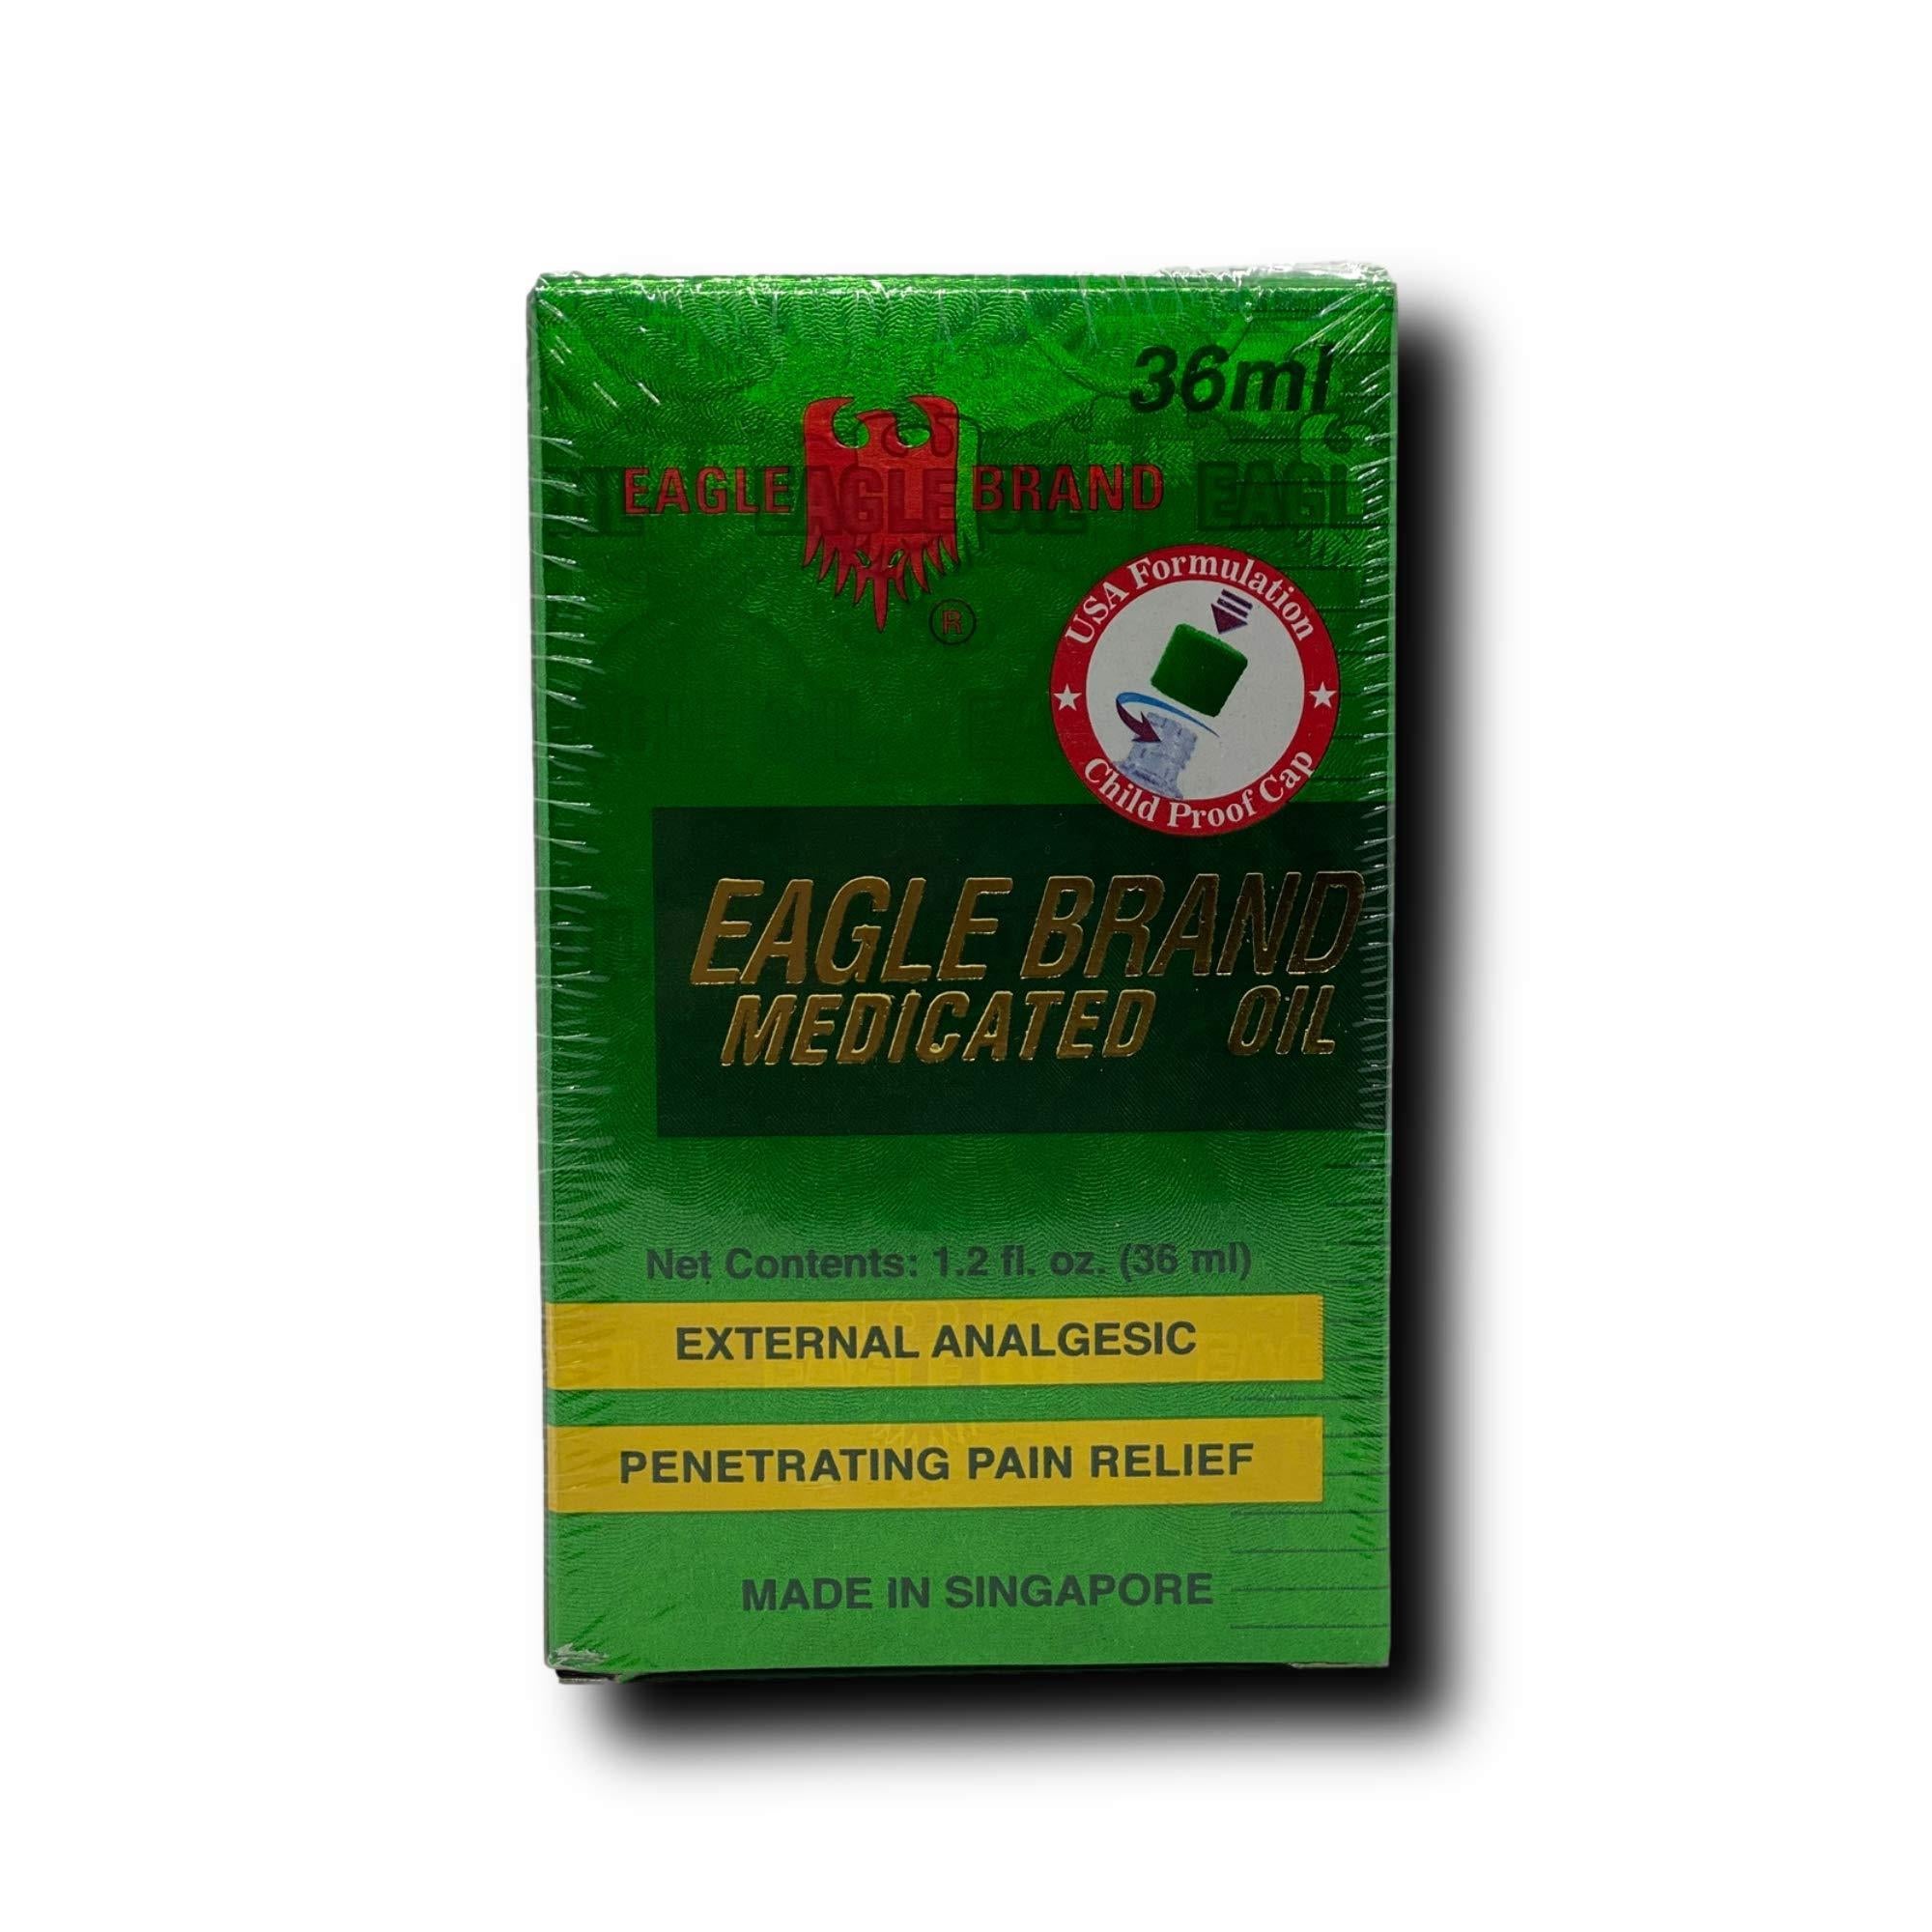 Bigger Eagle Brand Medicated Oil 1.2 FL. OZ. (36 mL) - Made in Singapore by Eagle Brand